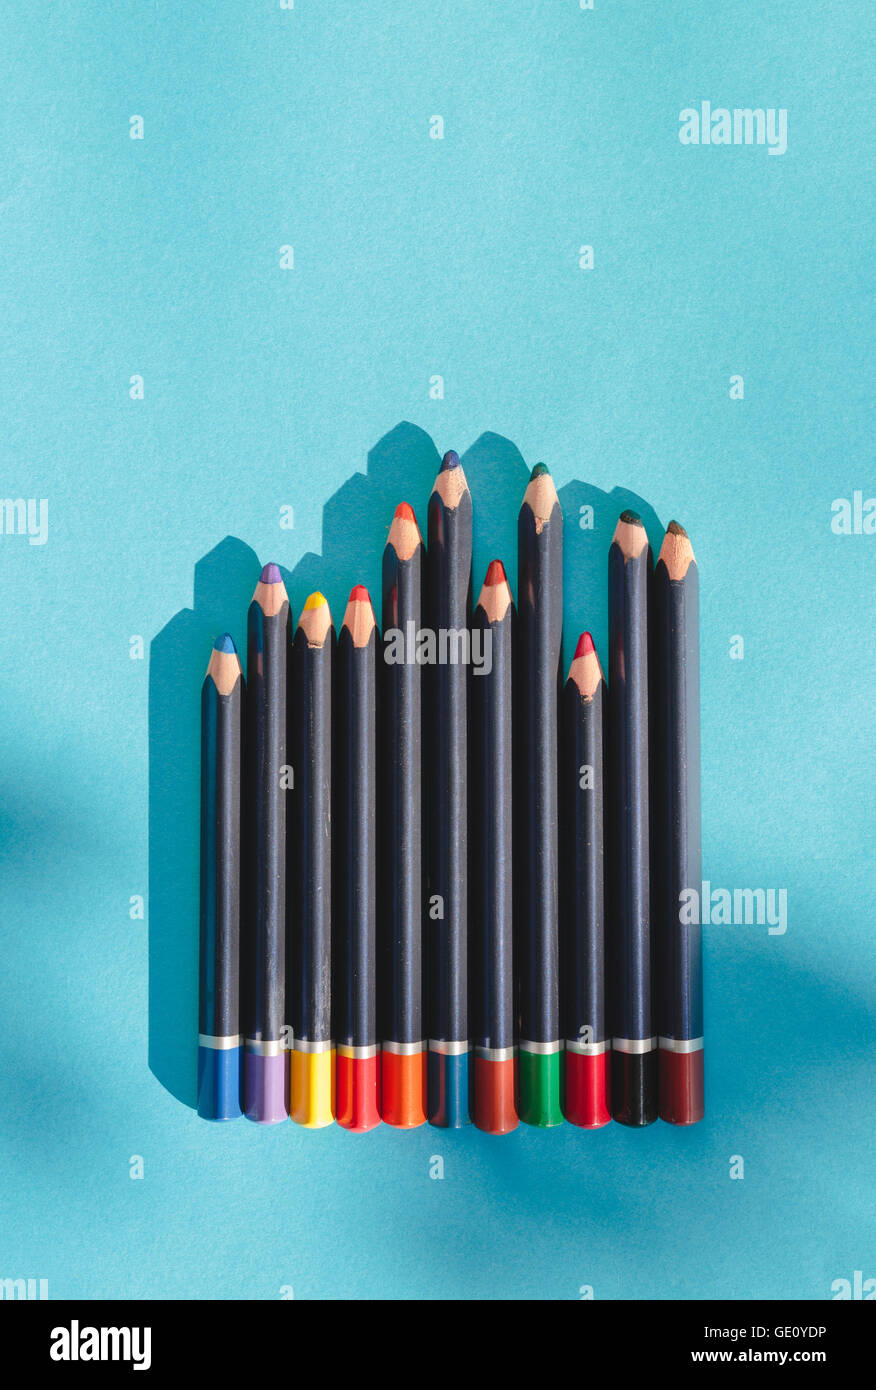 Crayons on blue background Stock Photo